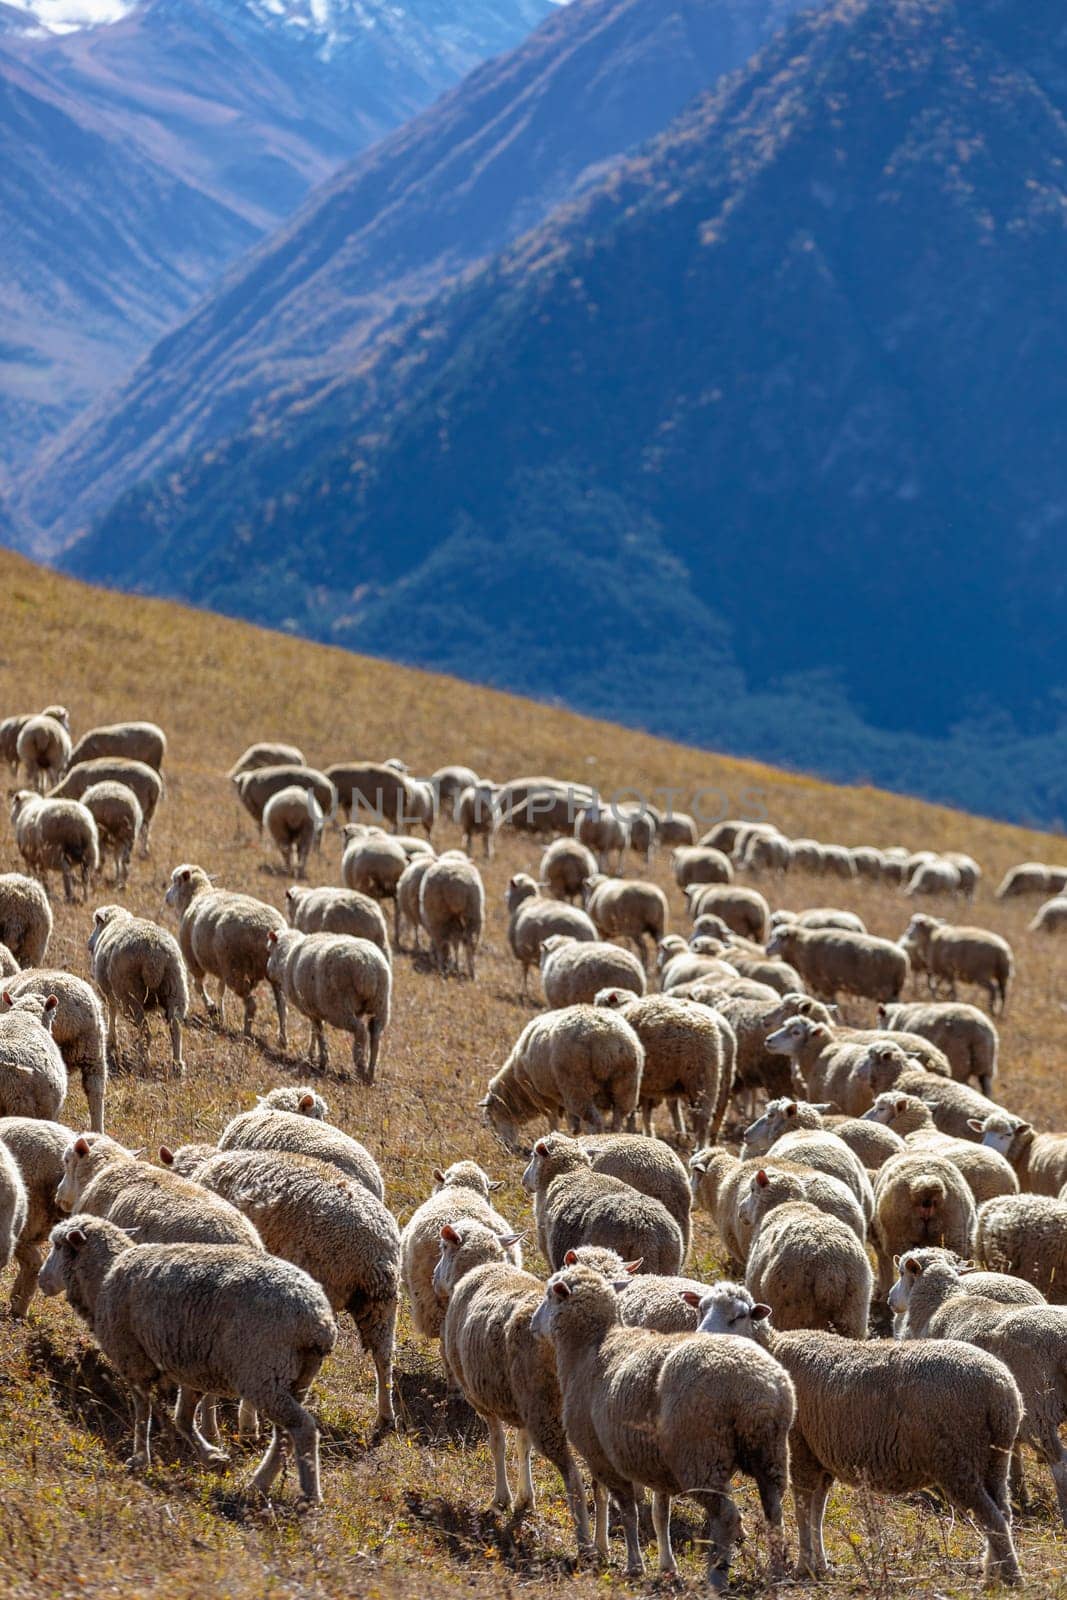 A flock of sheep in the mountains by Yurich32